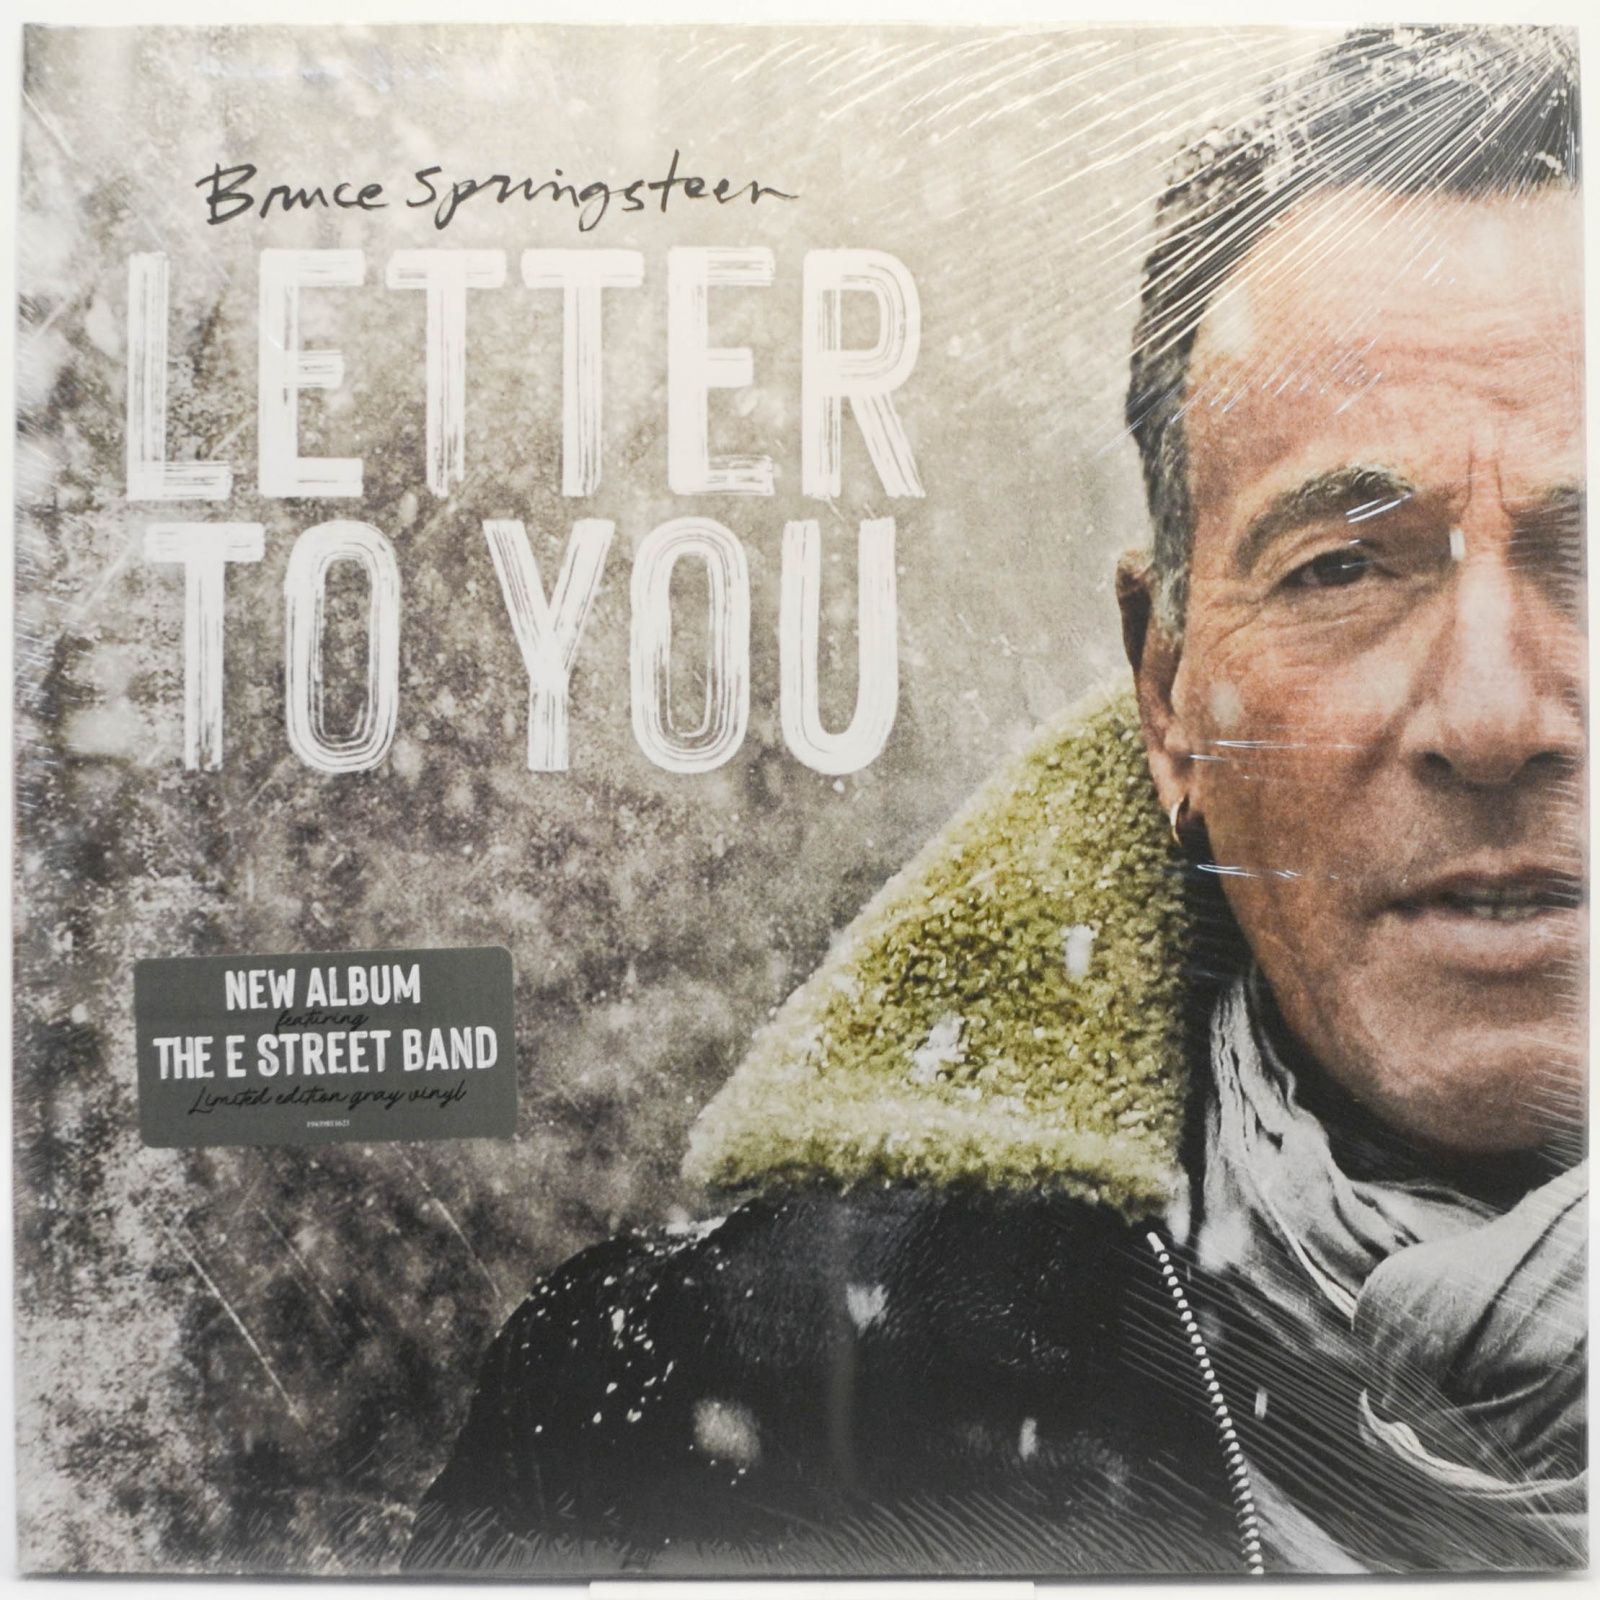 Bruce Springsteen — Letter To You, 2020